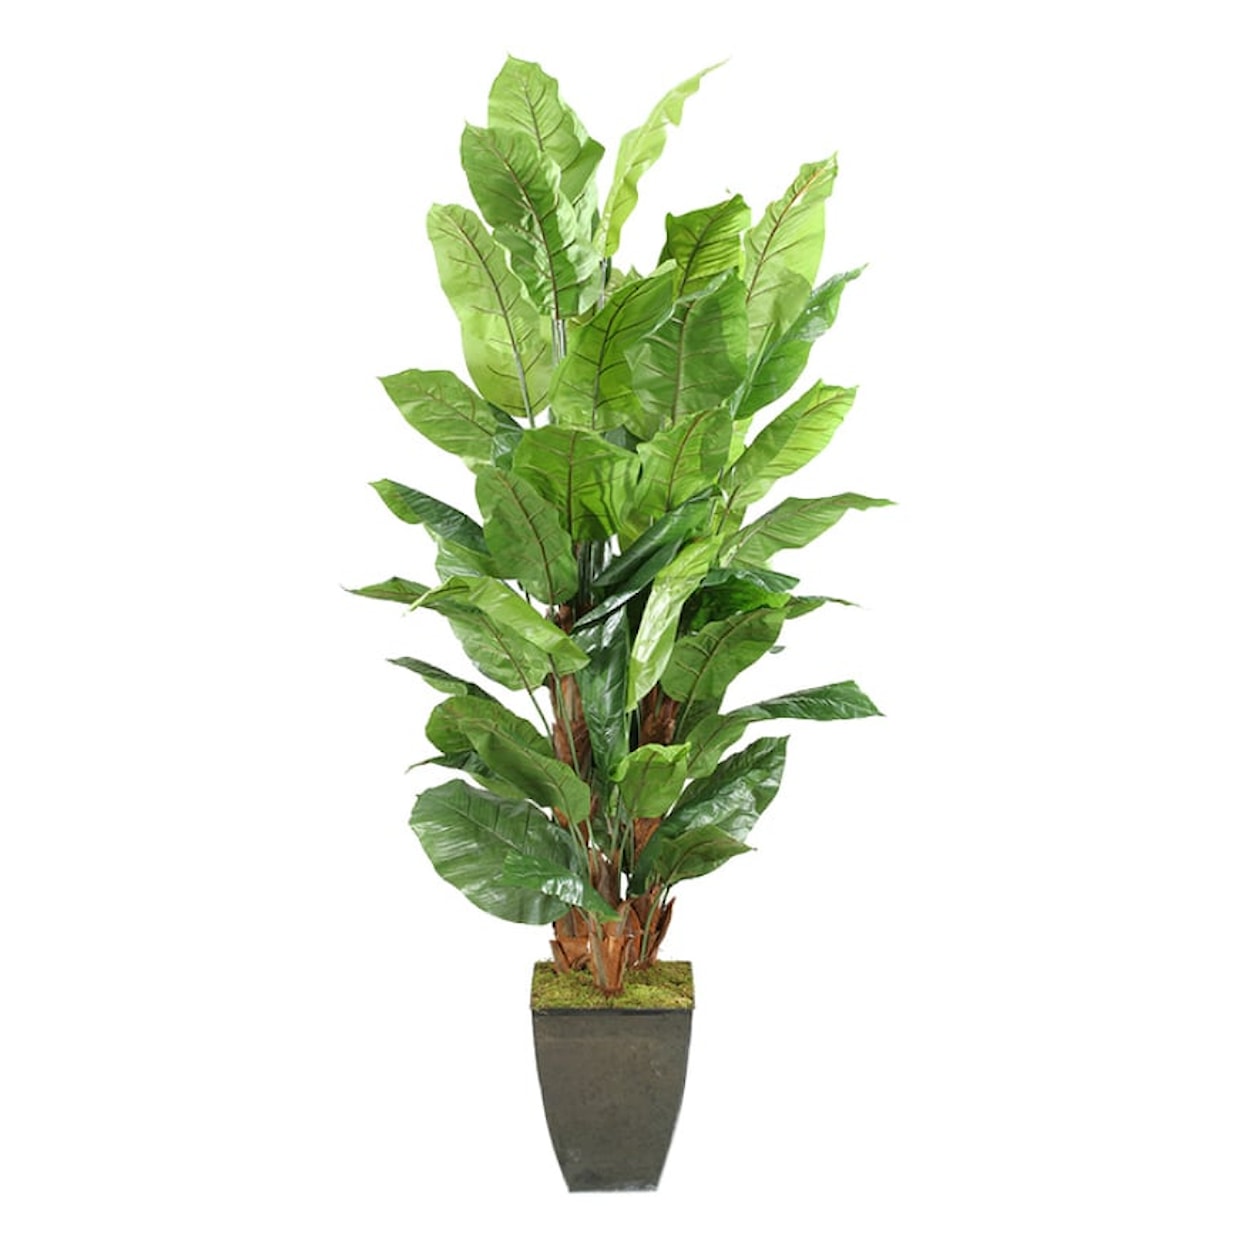 D&W Silks Artificial Trees Spath Plants in Square Metal Planter